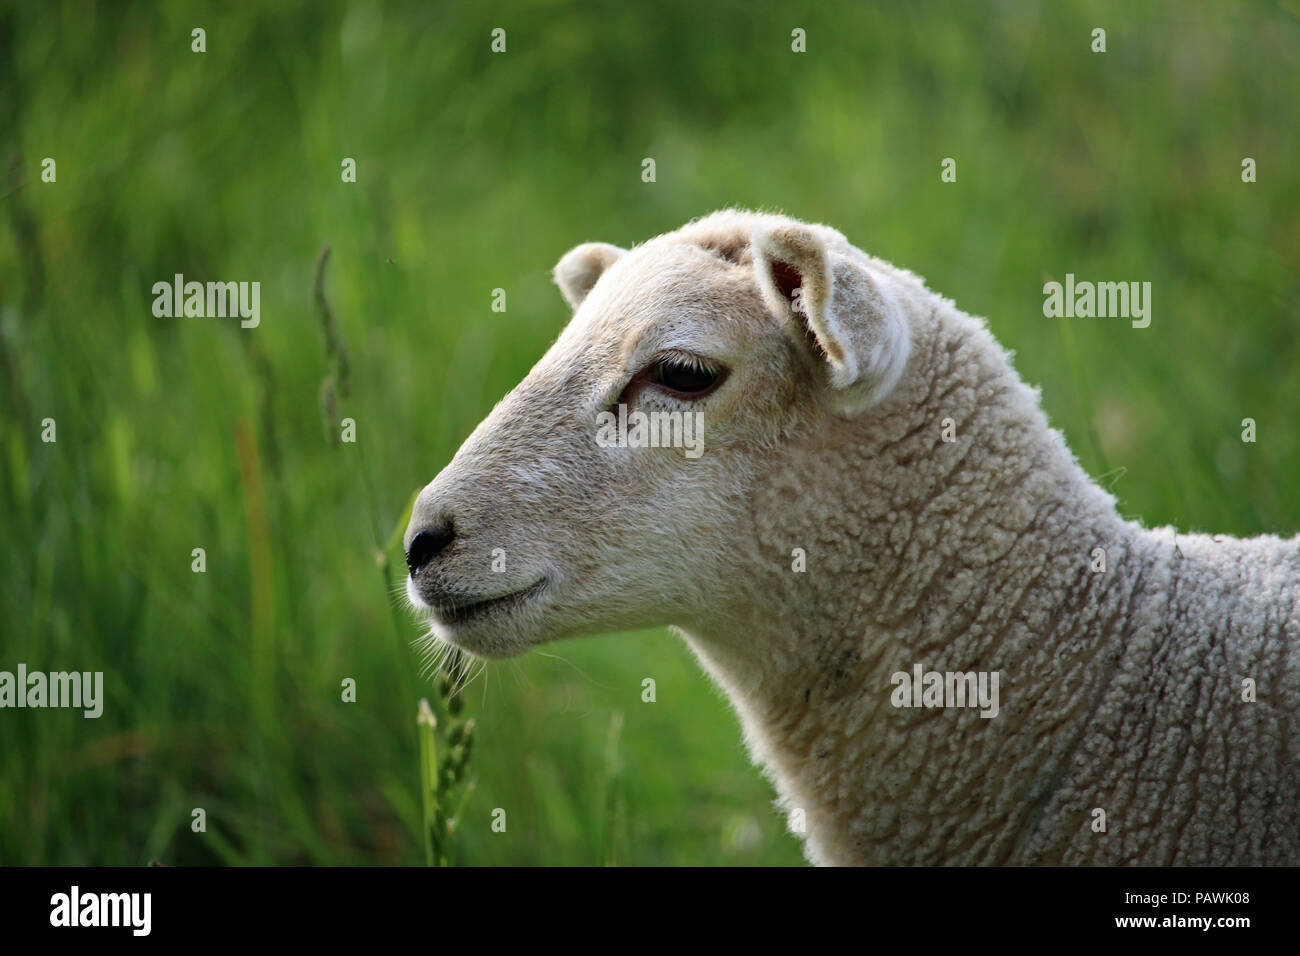 Head and shoulders of a white sheep in profile in a field in springtime with the grass field as background. Stock Photo